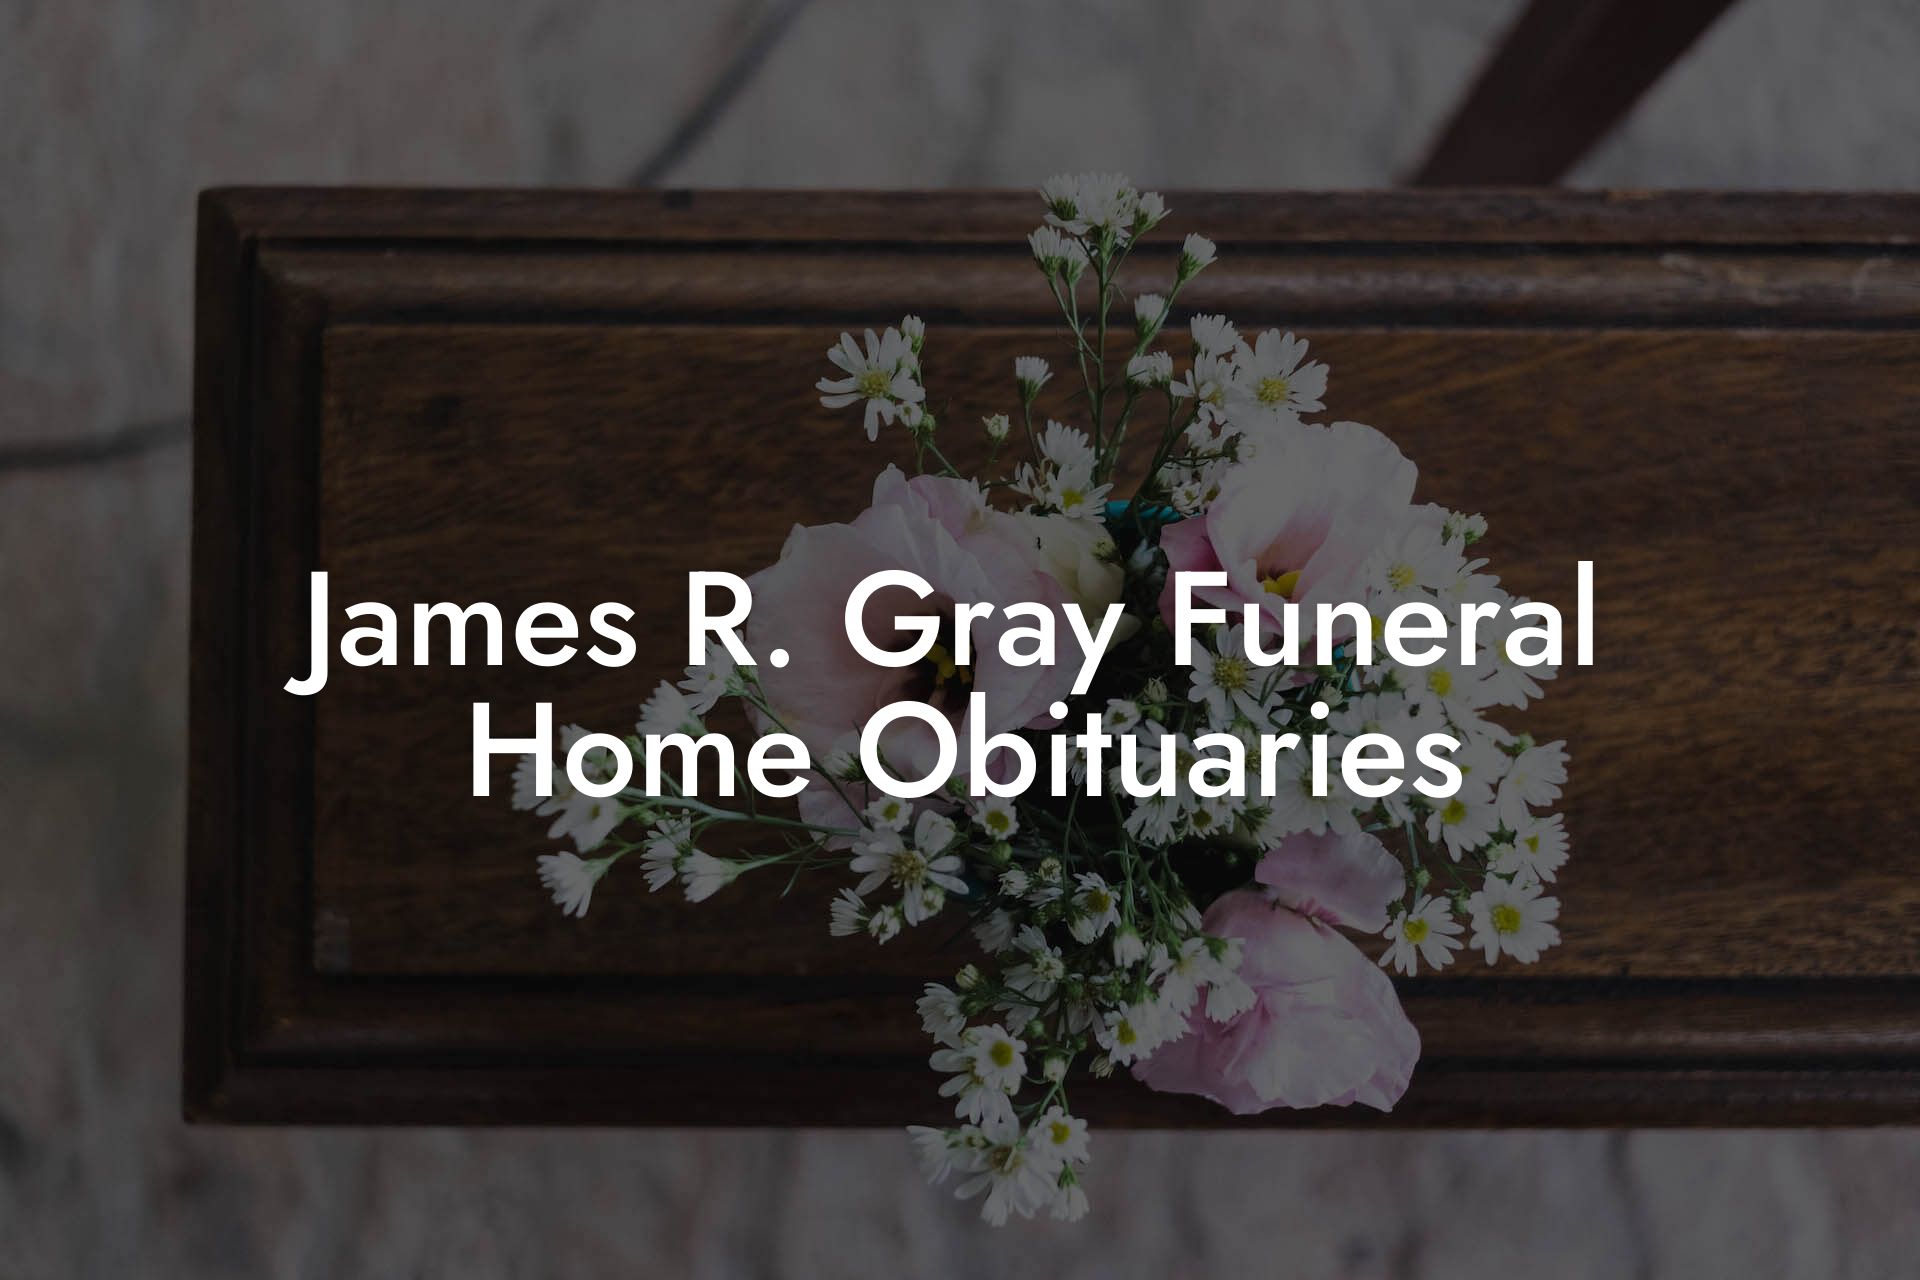 James R. Gray Funeral Home Obituaries